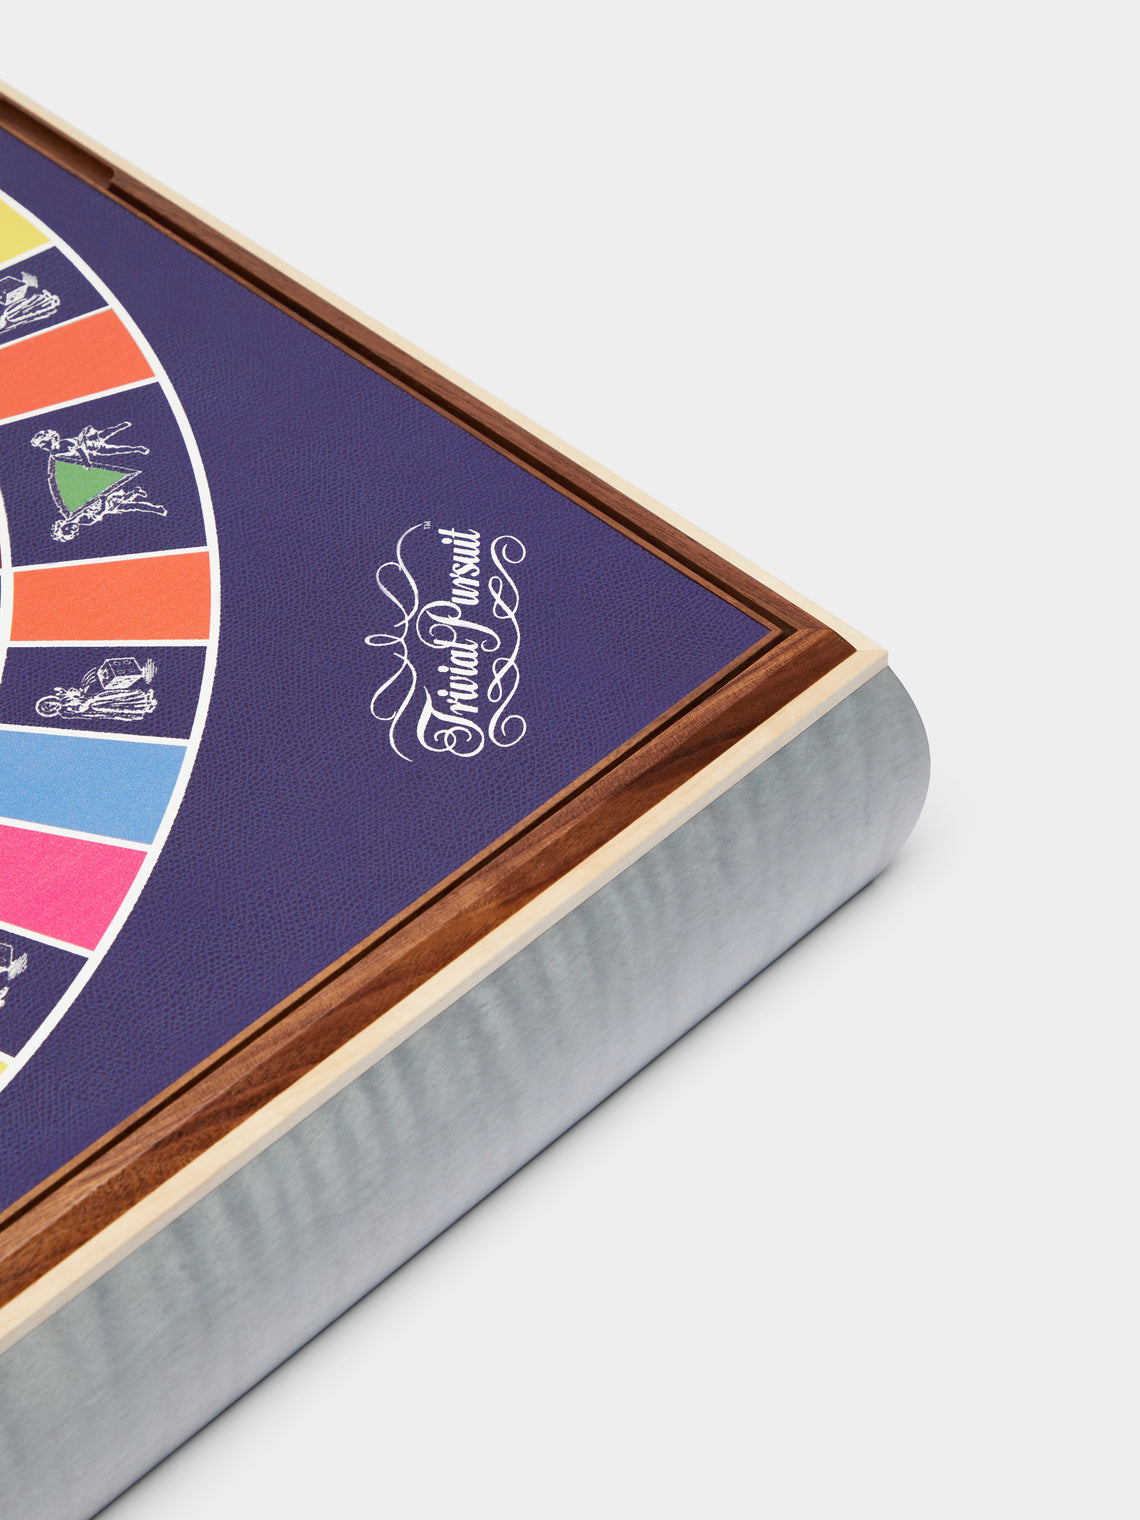 Linley - Leather Scrabble and Trivial Pursuit Games Compendium - Grey - ABASK